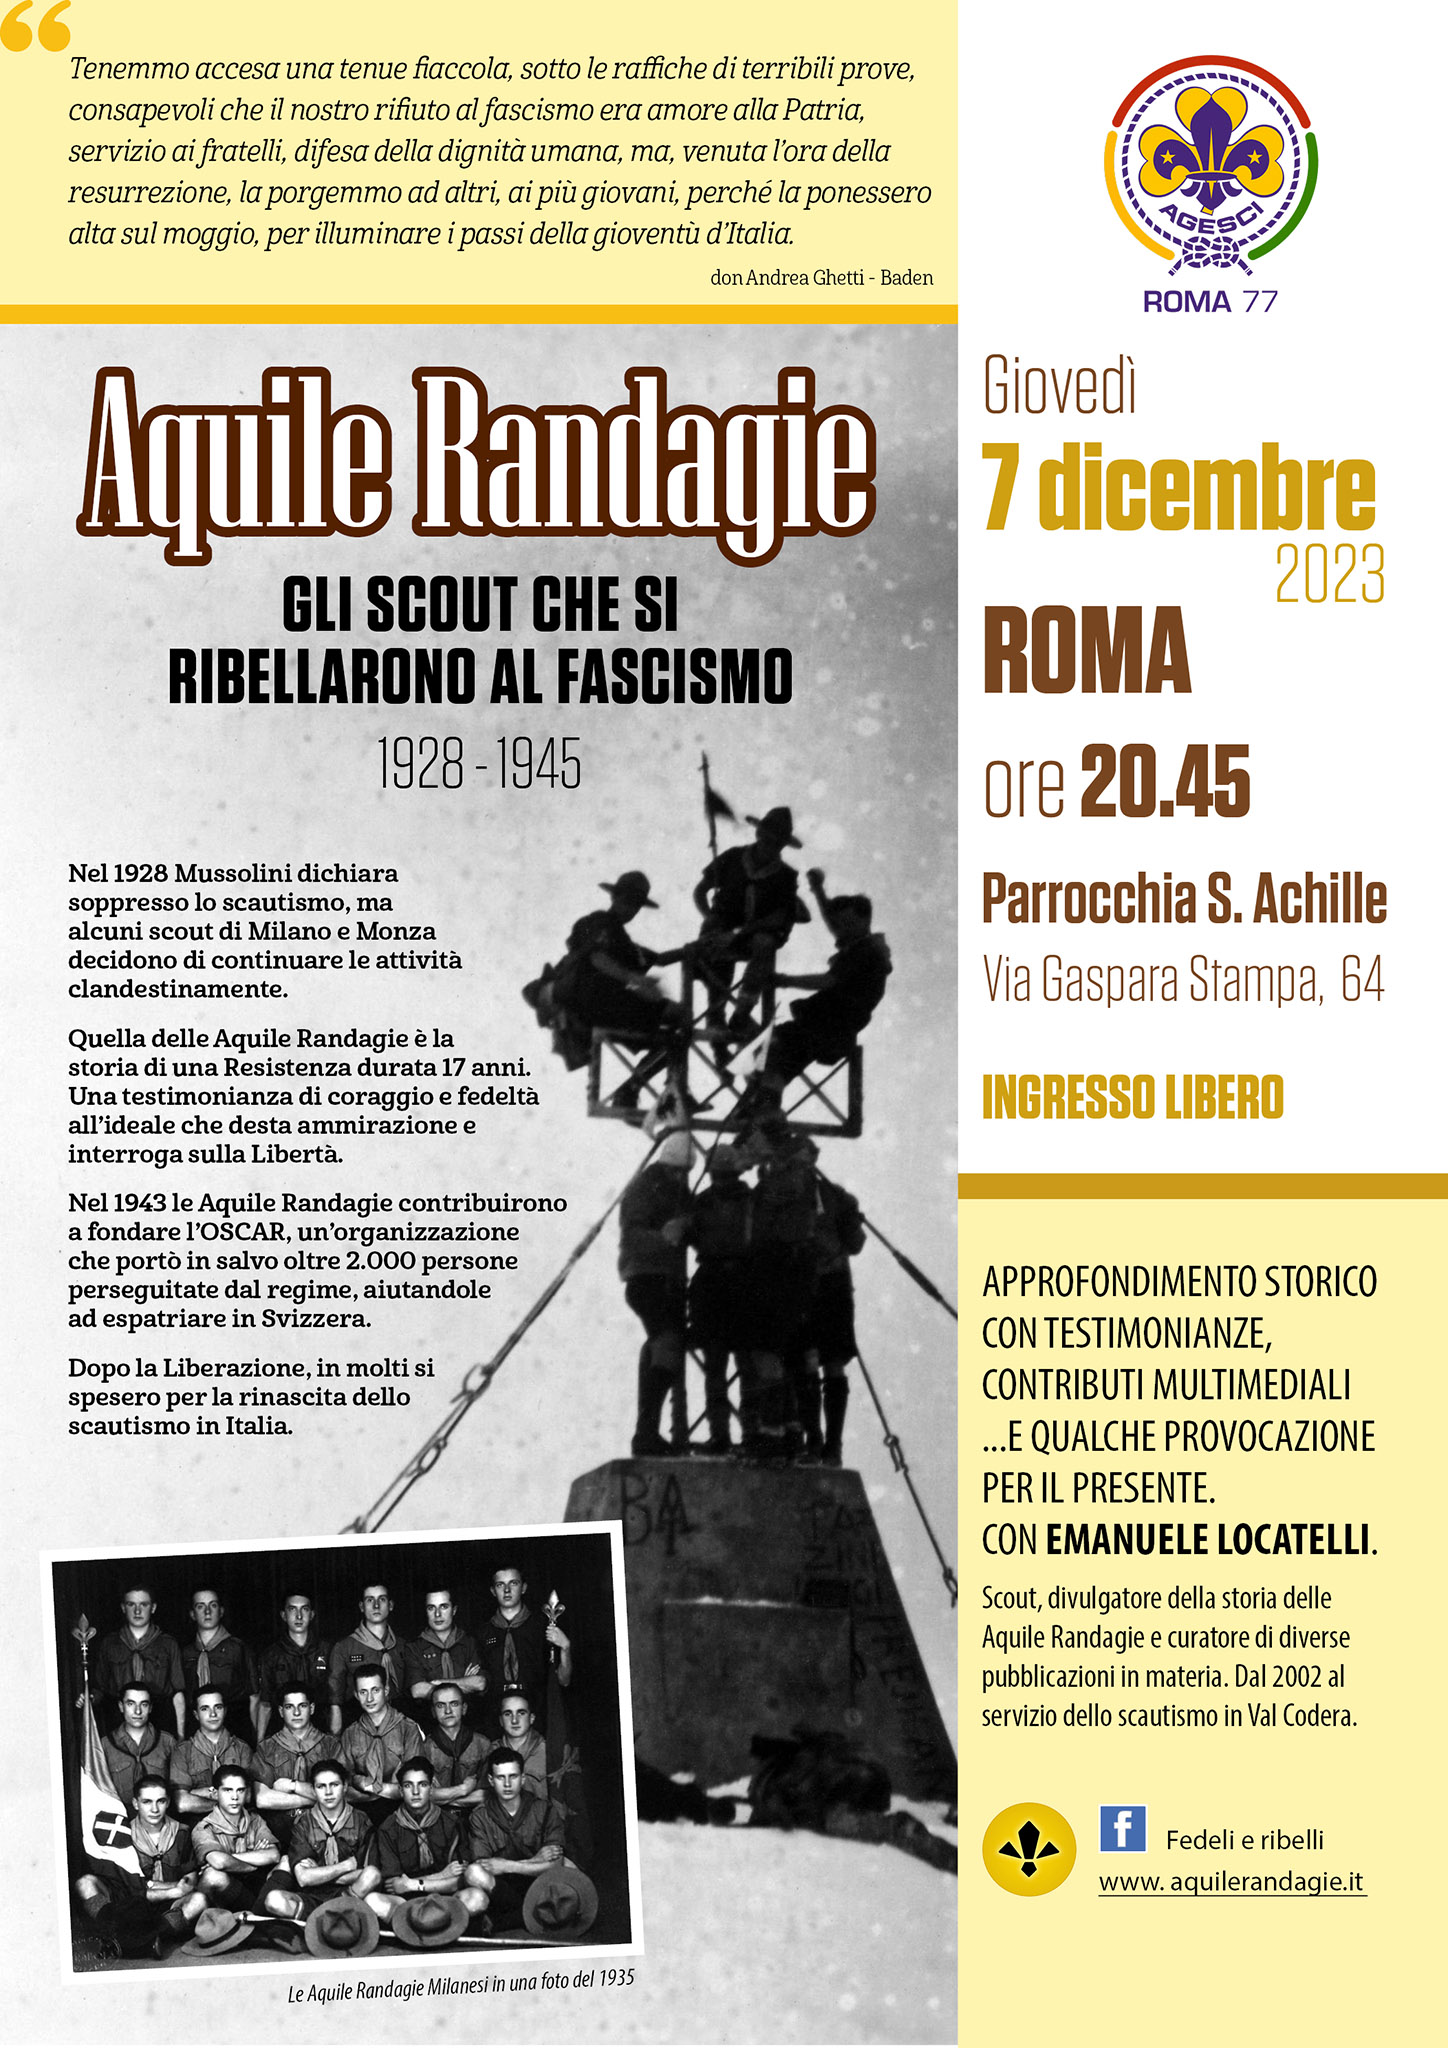 Gruppo scout Agesci Roma 77